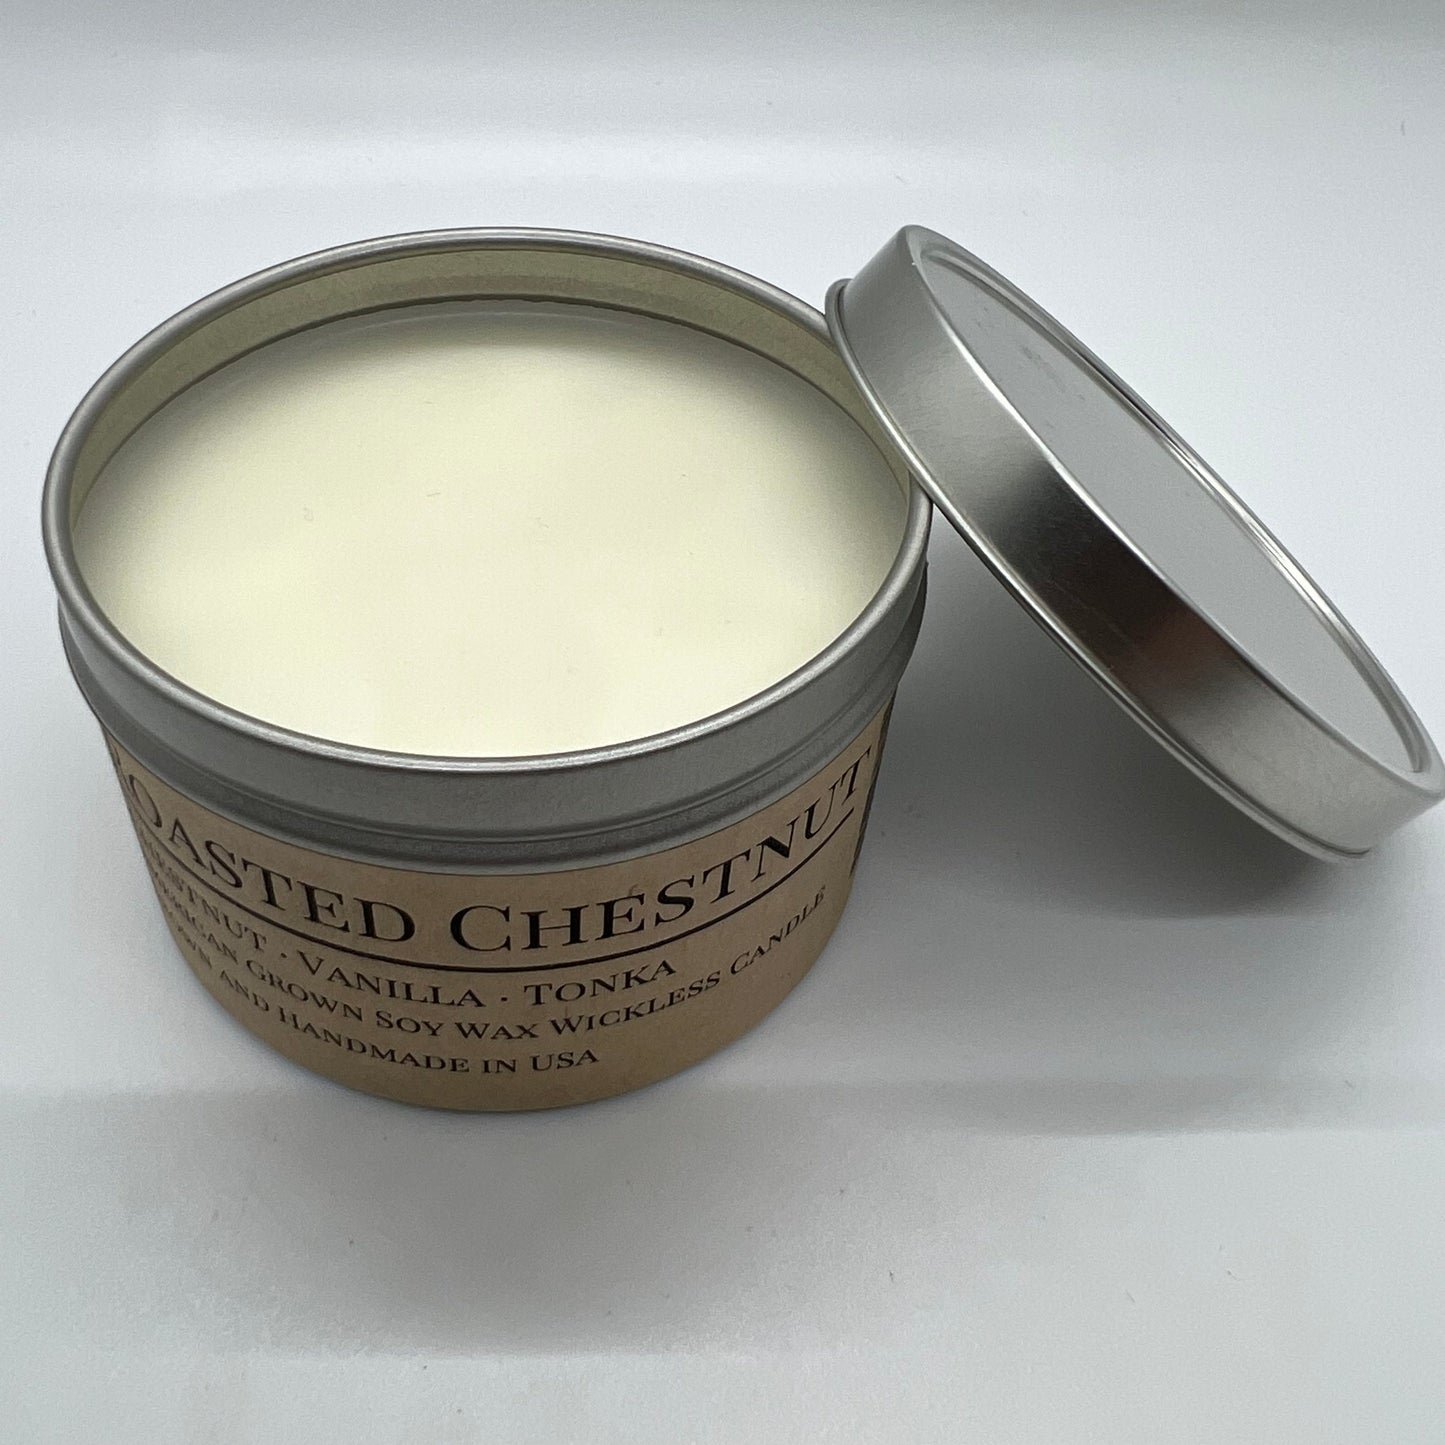 Roasted Chestnut Soy Wickless Candle Melt | 8 oz Travel Tin